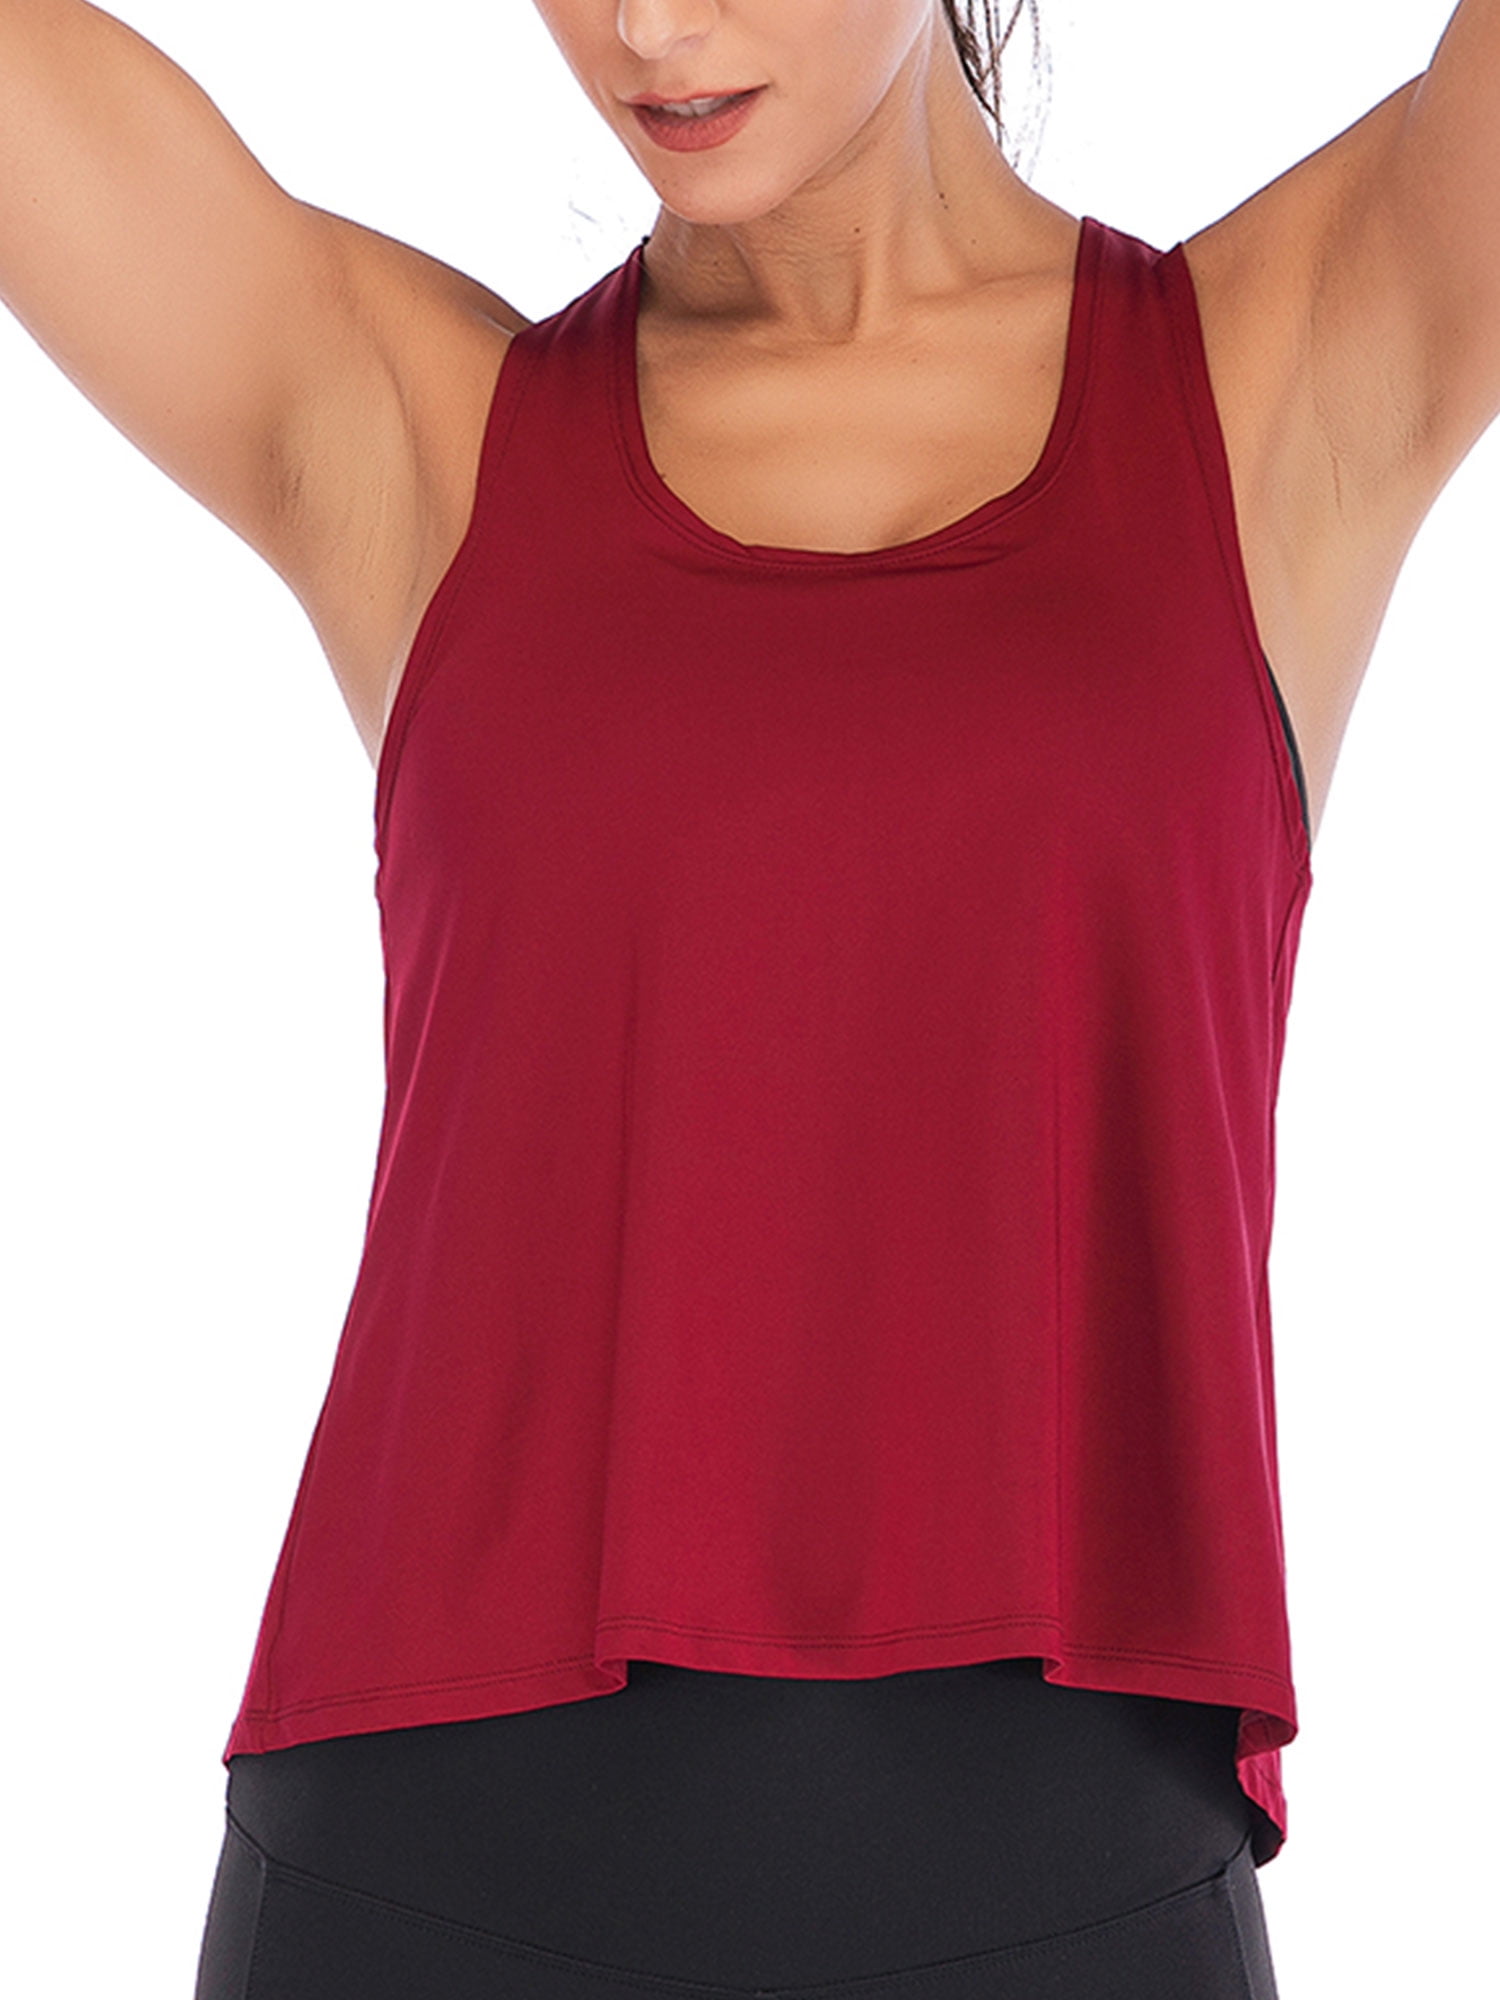 Activewear Vest Tops For Women Loose Casual Slim Fit Tank Tops Shirt Summer  Ladies Sports Gym Racer Back Running Vest Blouse Fitness Jogging Yoga Tank  Top Fashion Outfit Wine Red S 